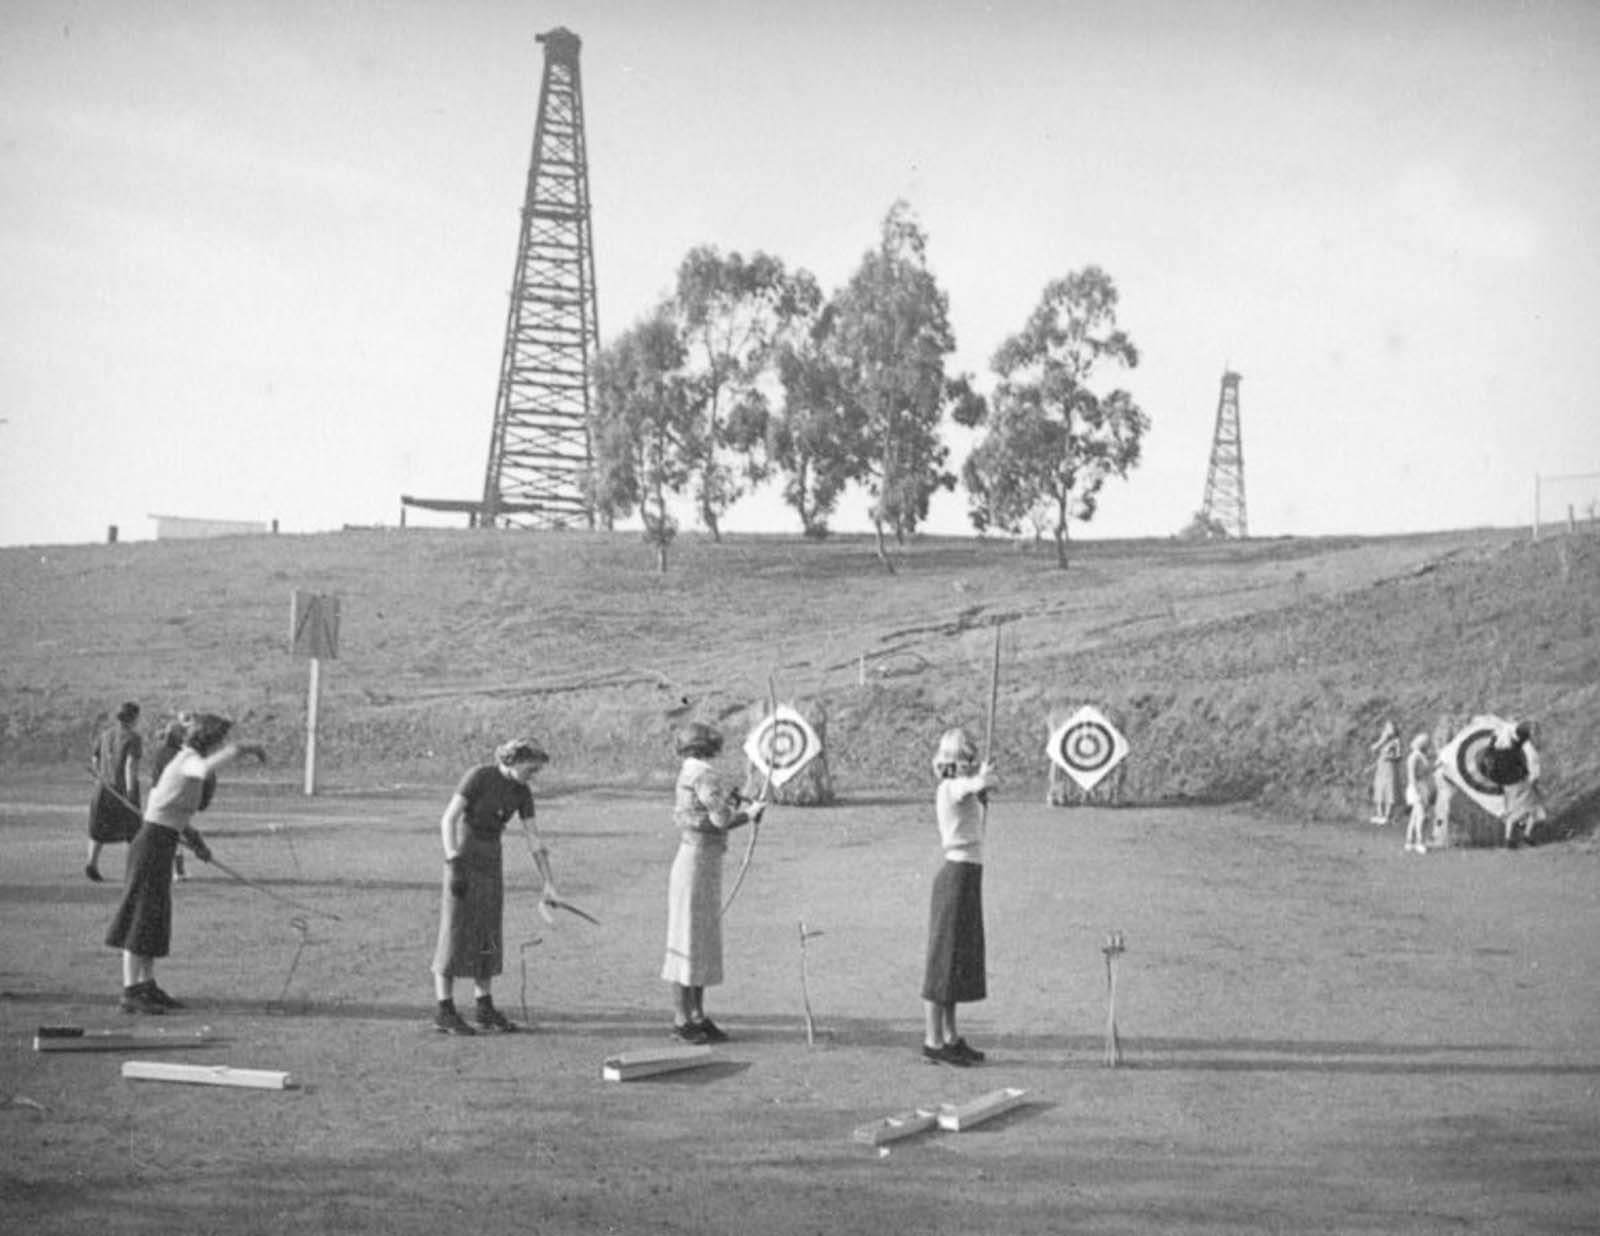 Students practice archery at Beverly Hills High School, with oil derricks nearby